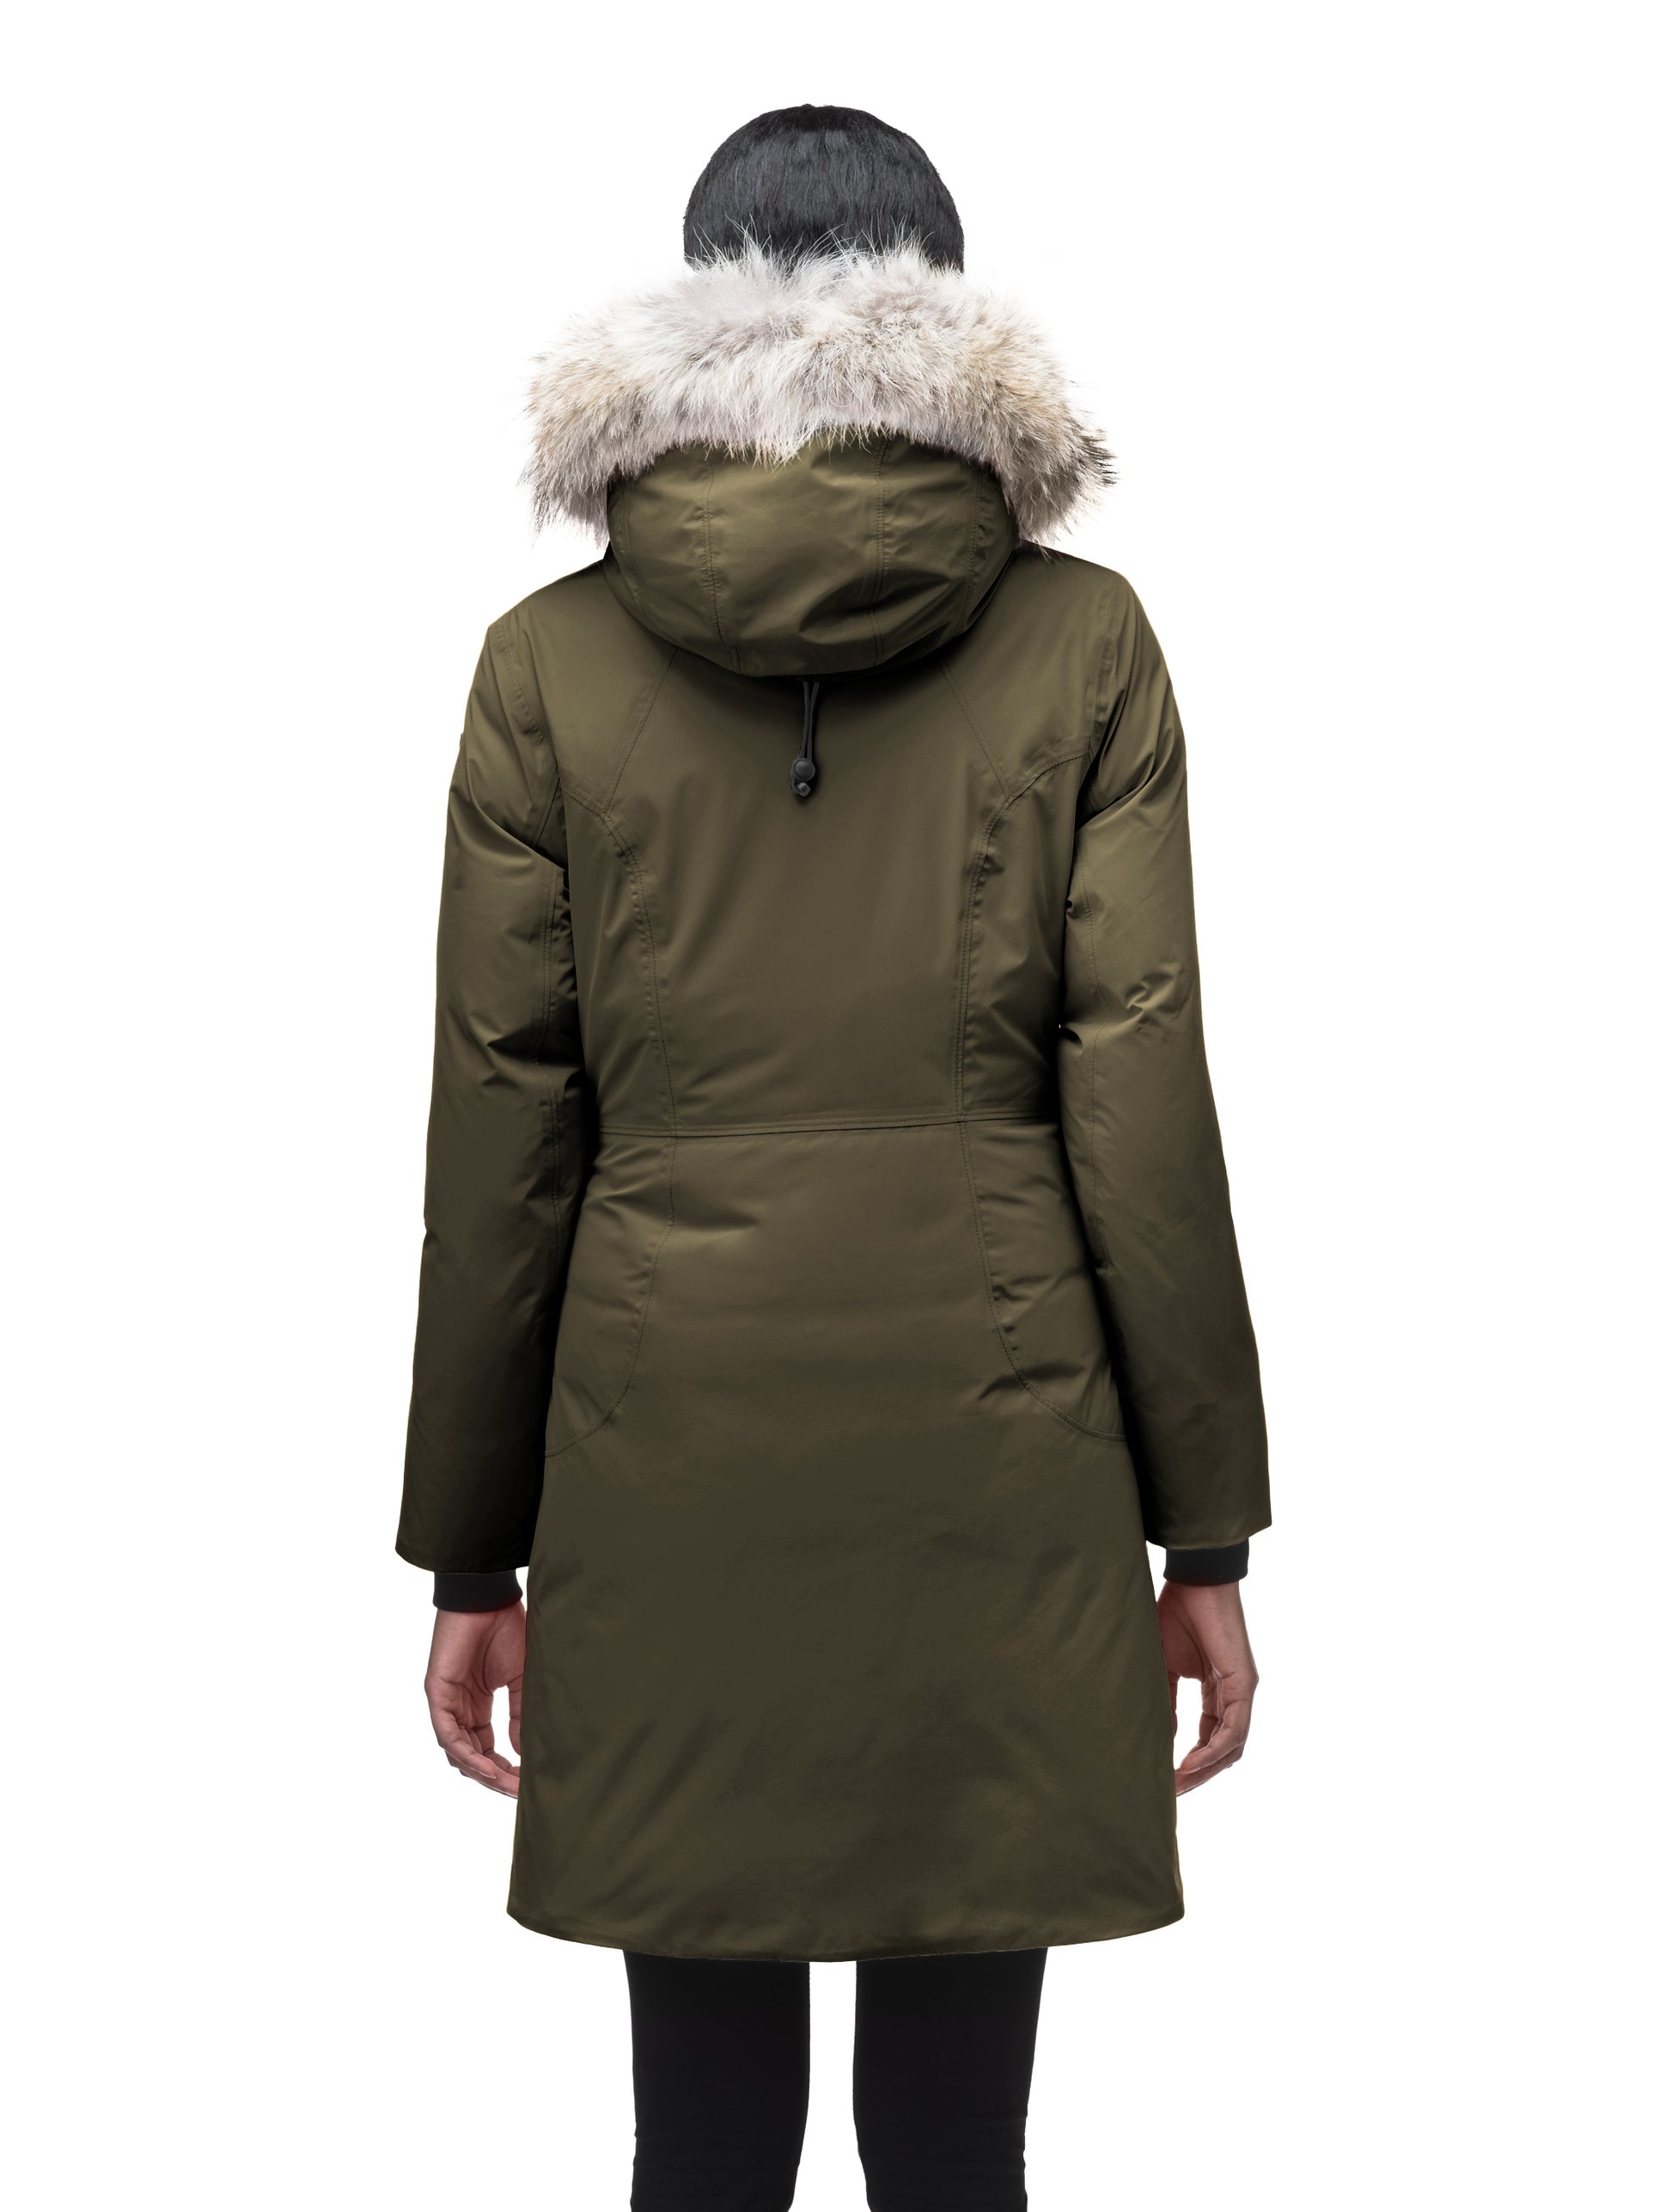 Ladies thigh length down-filled parka with non-removable hood and removable coyote fur trim in Fatigue